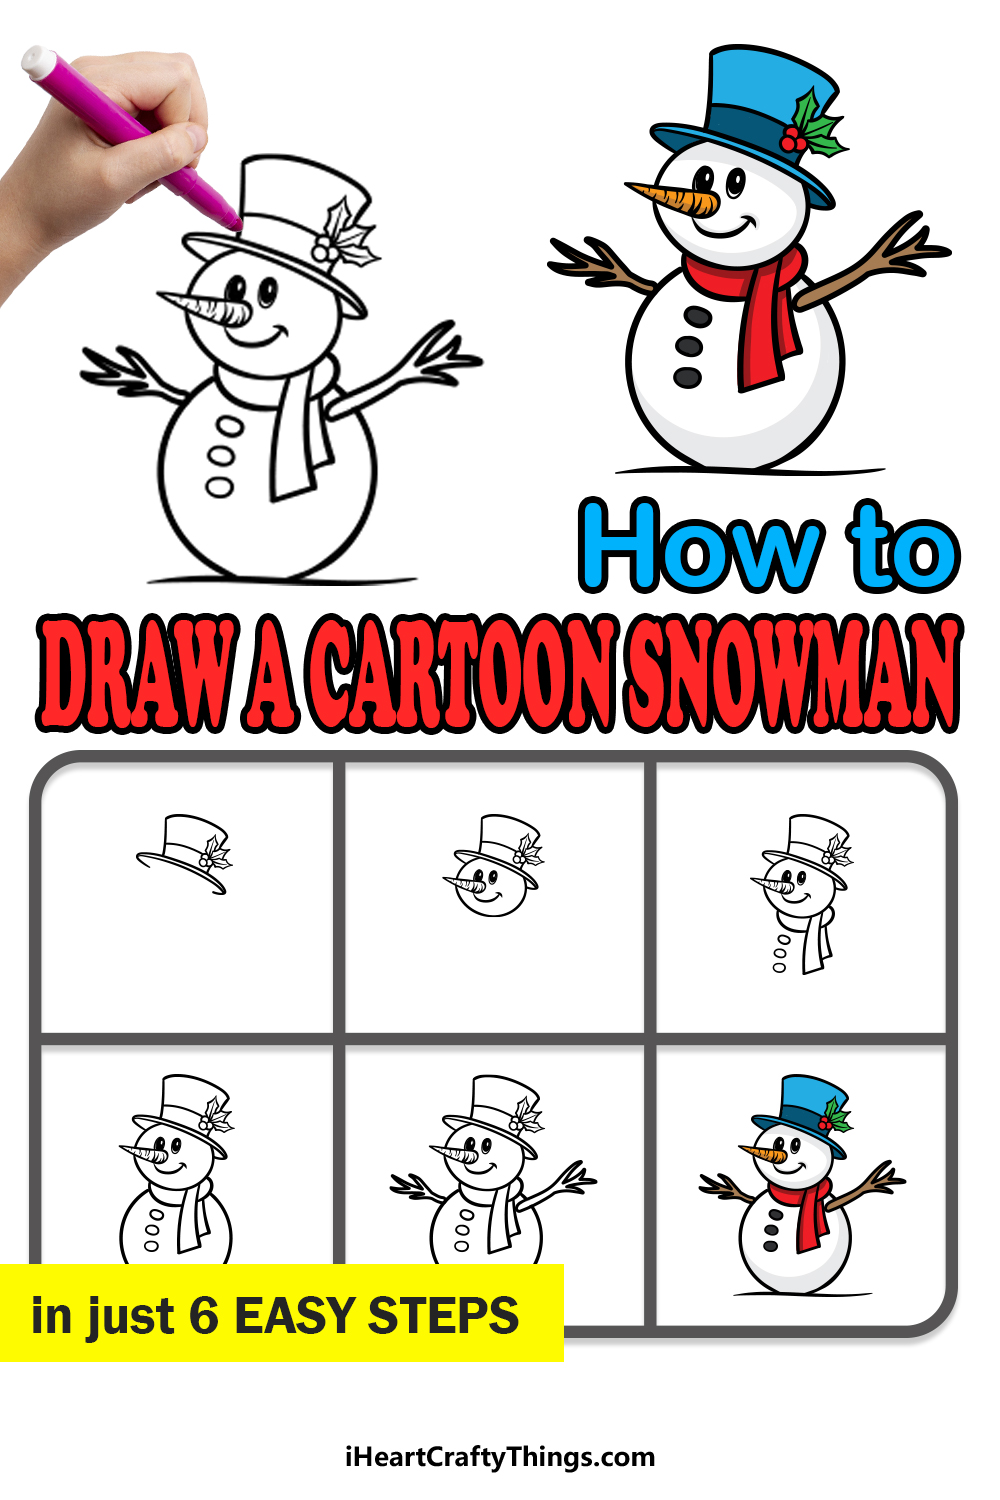 how to draw a cartoon snowman in 6 easy steps